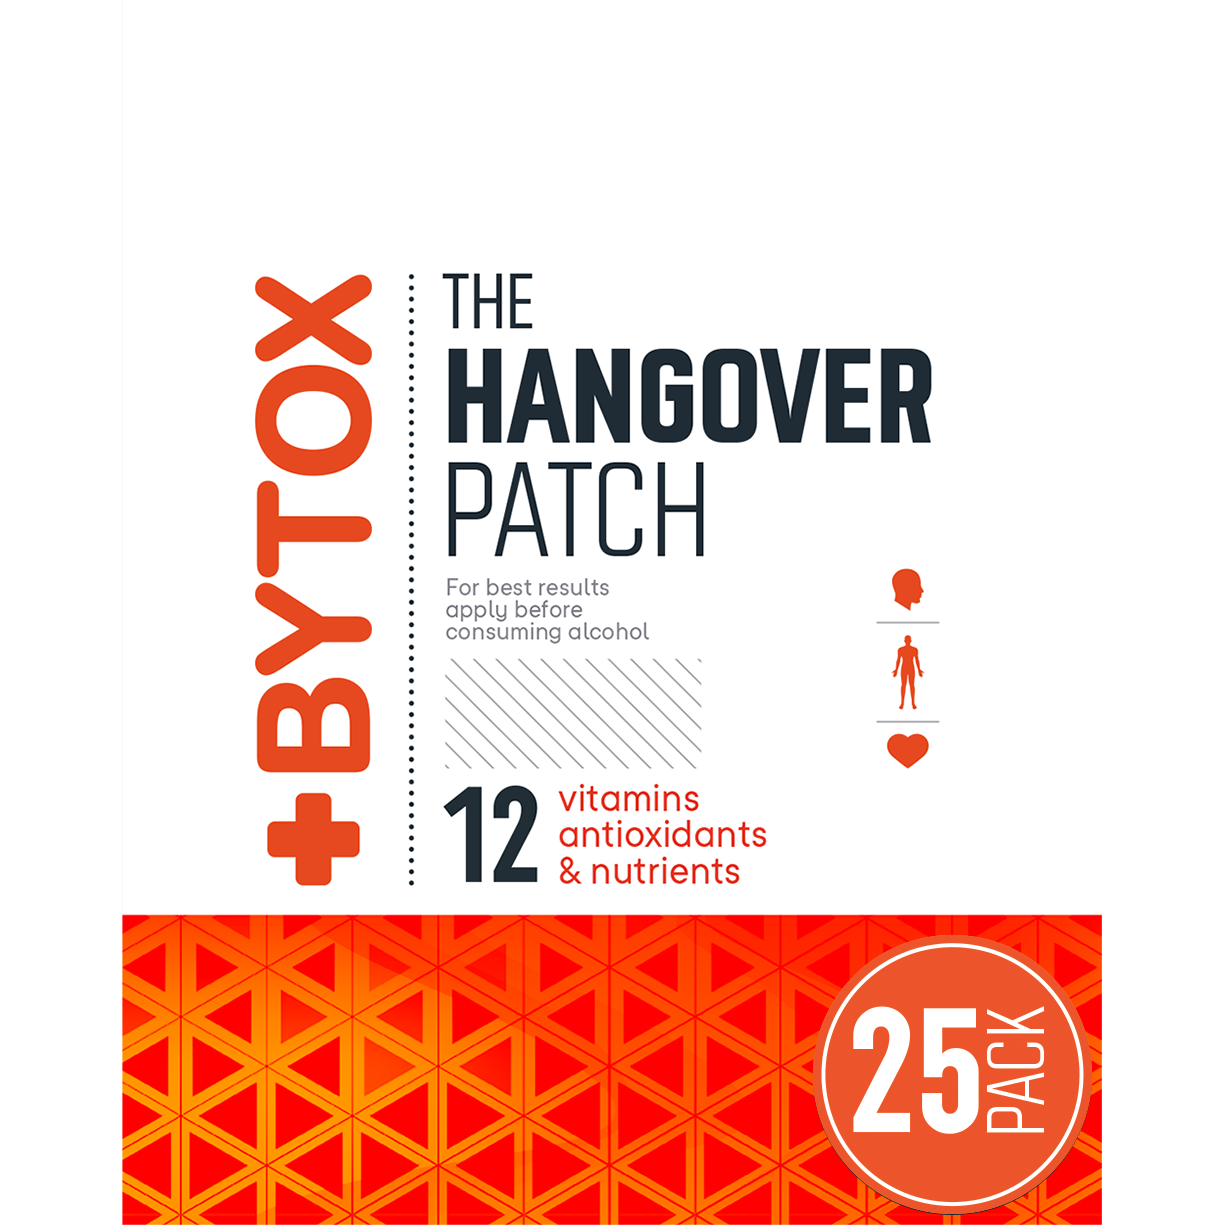 Bytox Immune Booster Patch – Bytox Hangover Patch